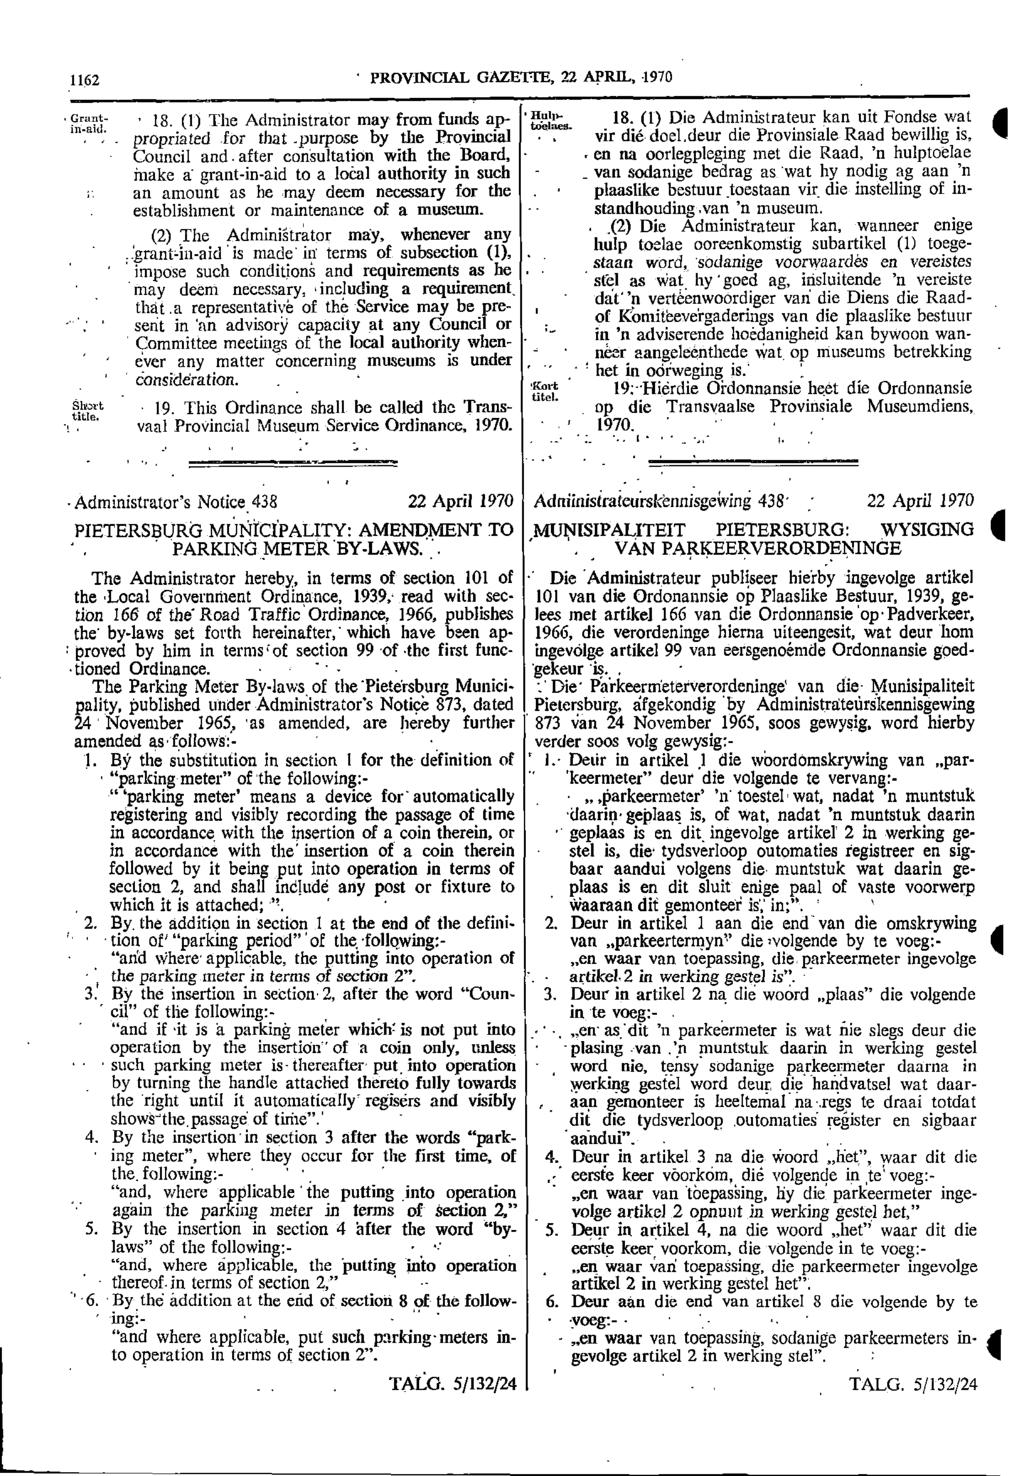 wat 1162 PROVINCIAL GAZETTE 22 APRIL 1970 Grant 18 (1) me 1 1 Administrator may from funds ap at 18 (1) Die Administrateur kan uit Fondse wat A in aitl propriated for that purpose by the Provincial